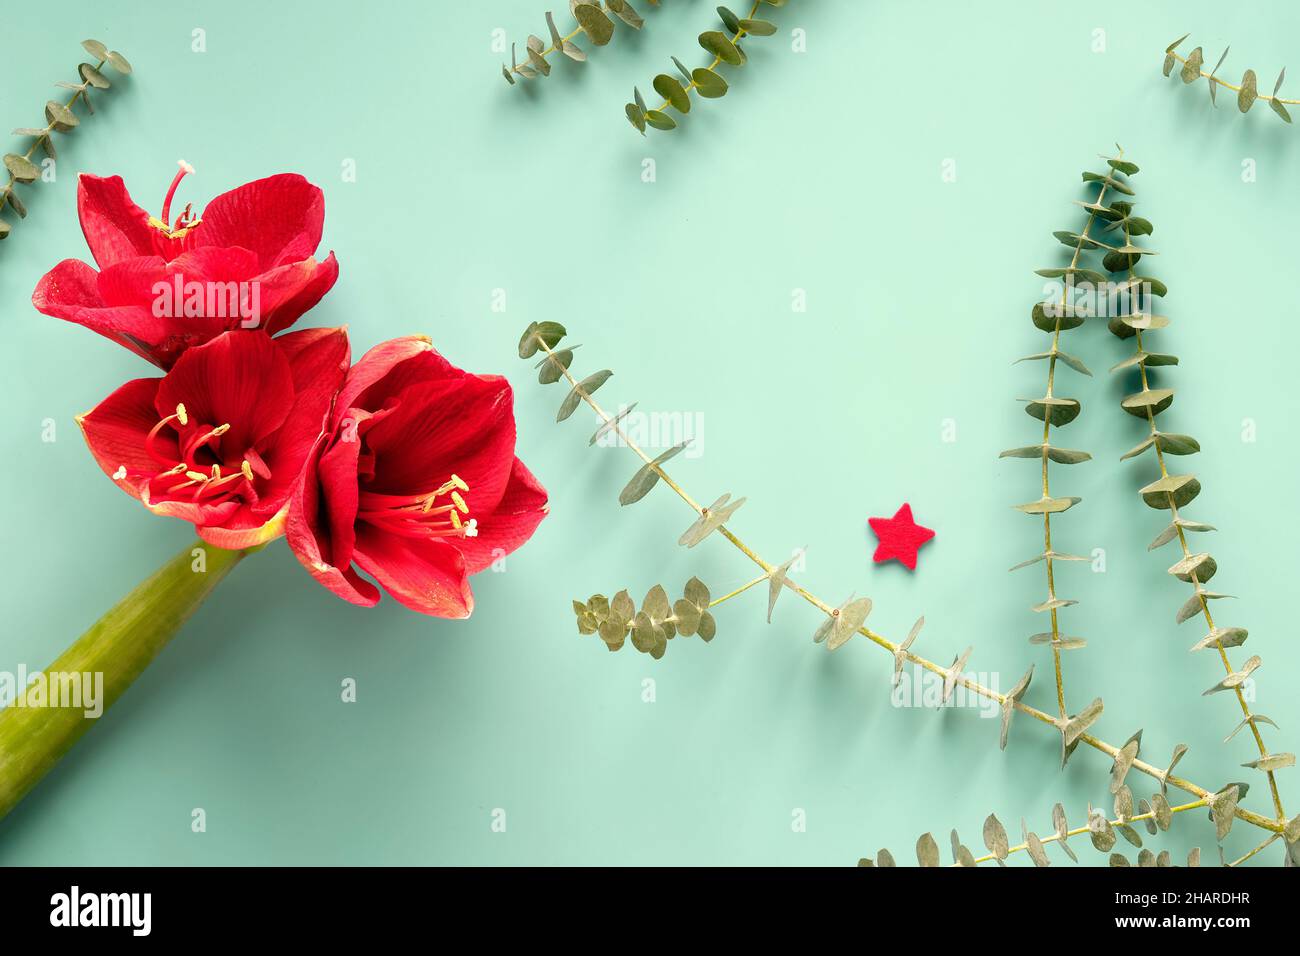 Red amaryllis flowers on blue mint background with eucalyptus, wood hearts, pine cones and exotic fern leaves. Stock Photo